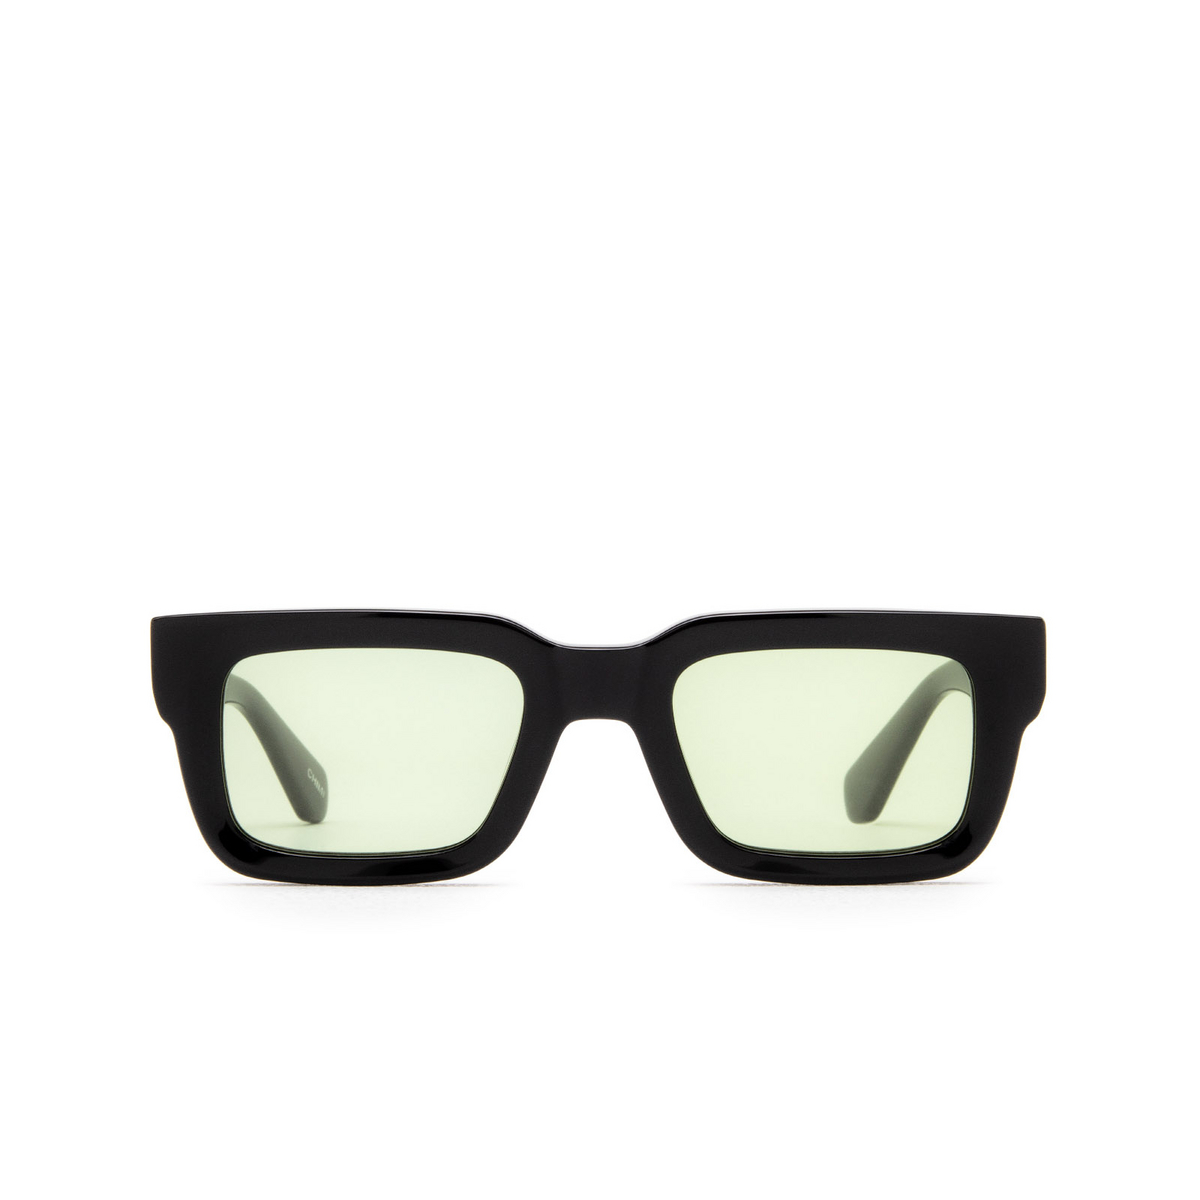 Chimi® Rectangle Sunglasses: 05 color Black Green - front view